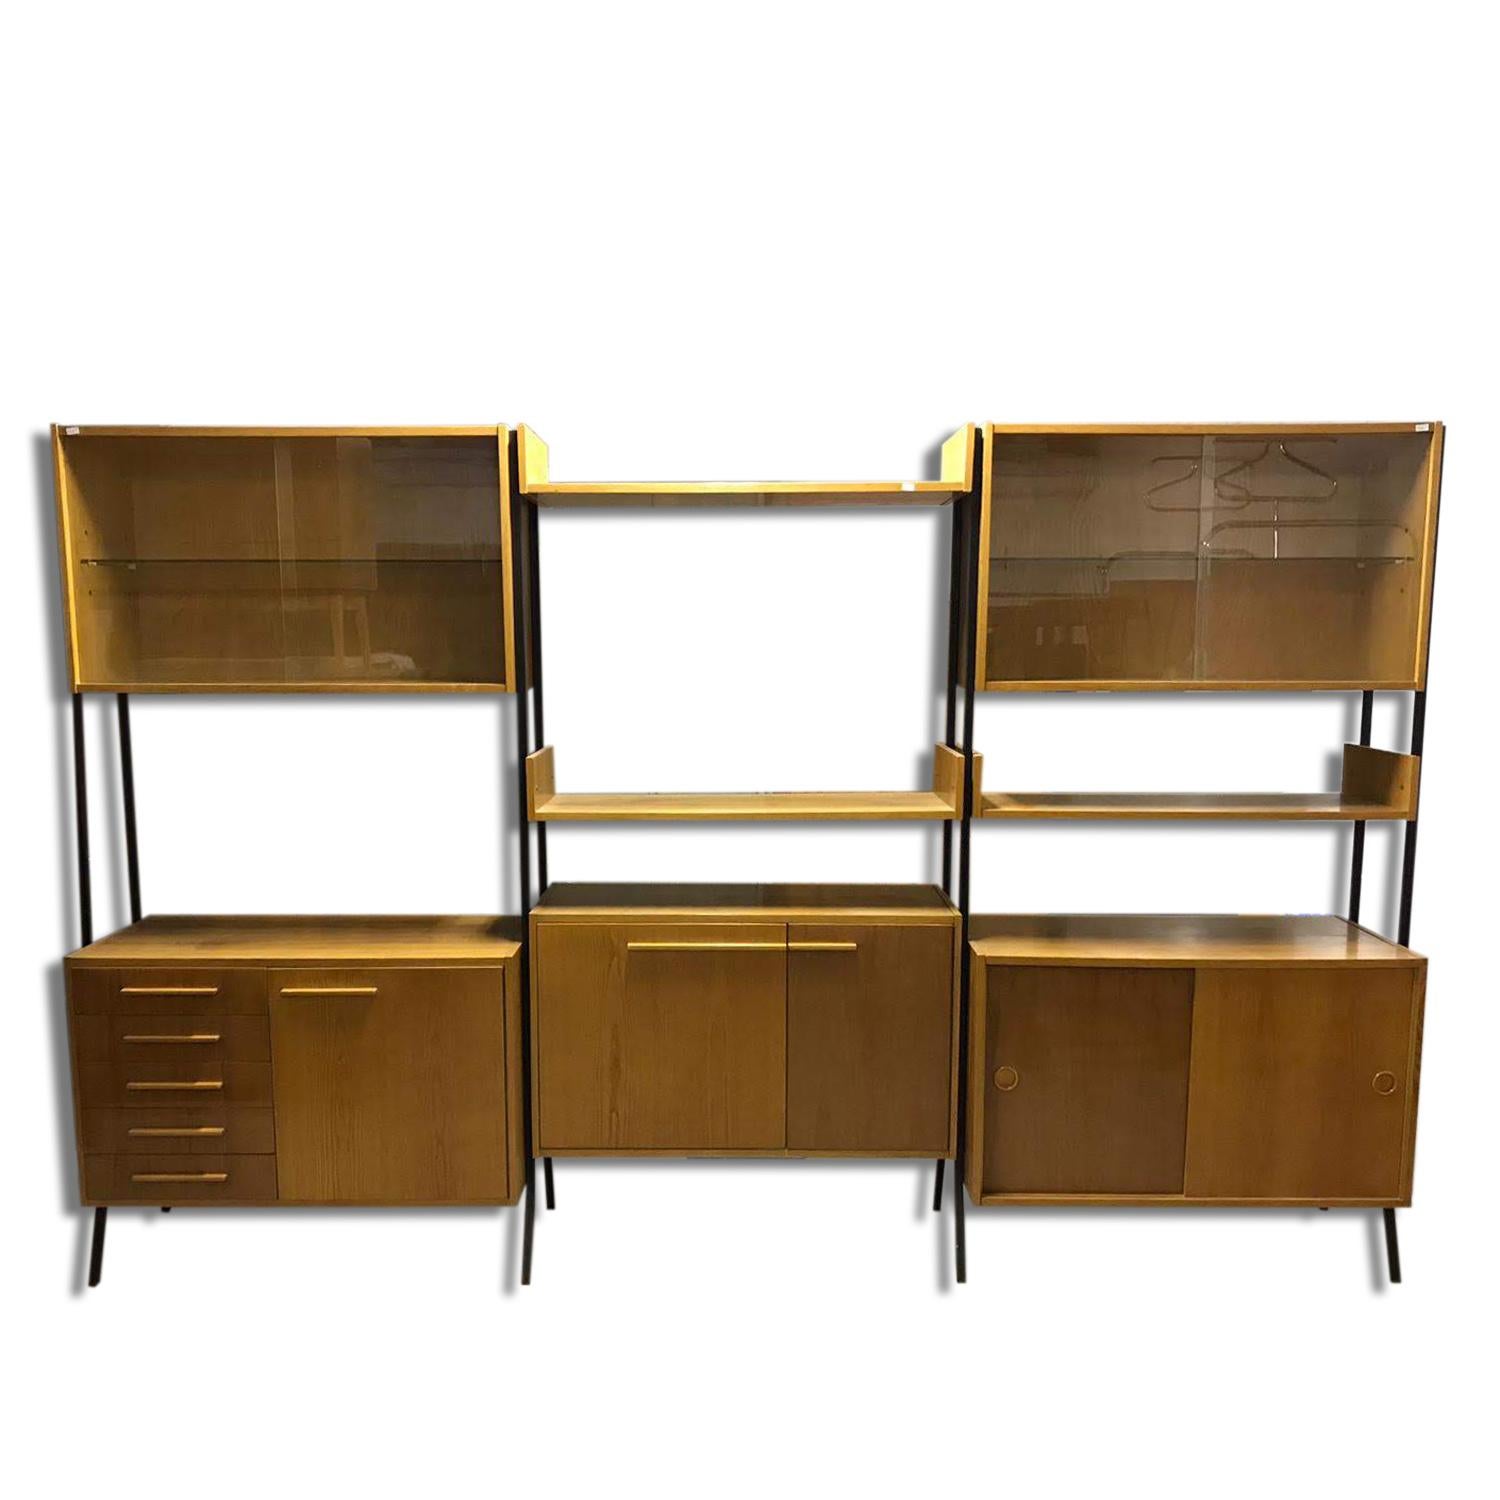 Mid century Czechoslovak modernist beech unit shelf system by Frantisek Jirak for Tatra nabytok. Made in Czechoslovakia during the 1960s. The system is made of beech wood and plywood and has an iron structure. The unit is in very good condition.